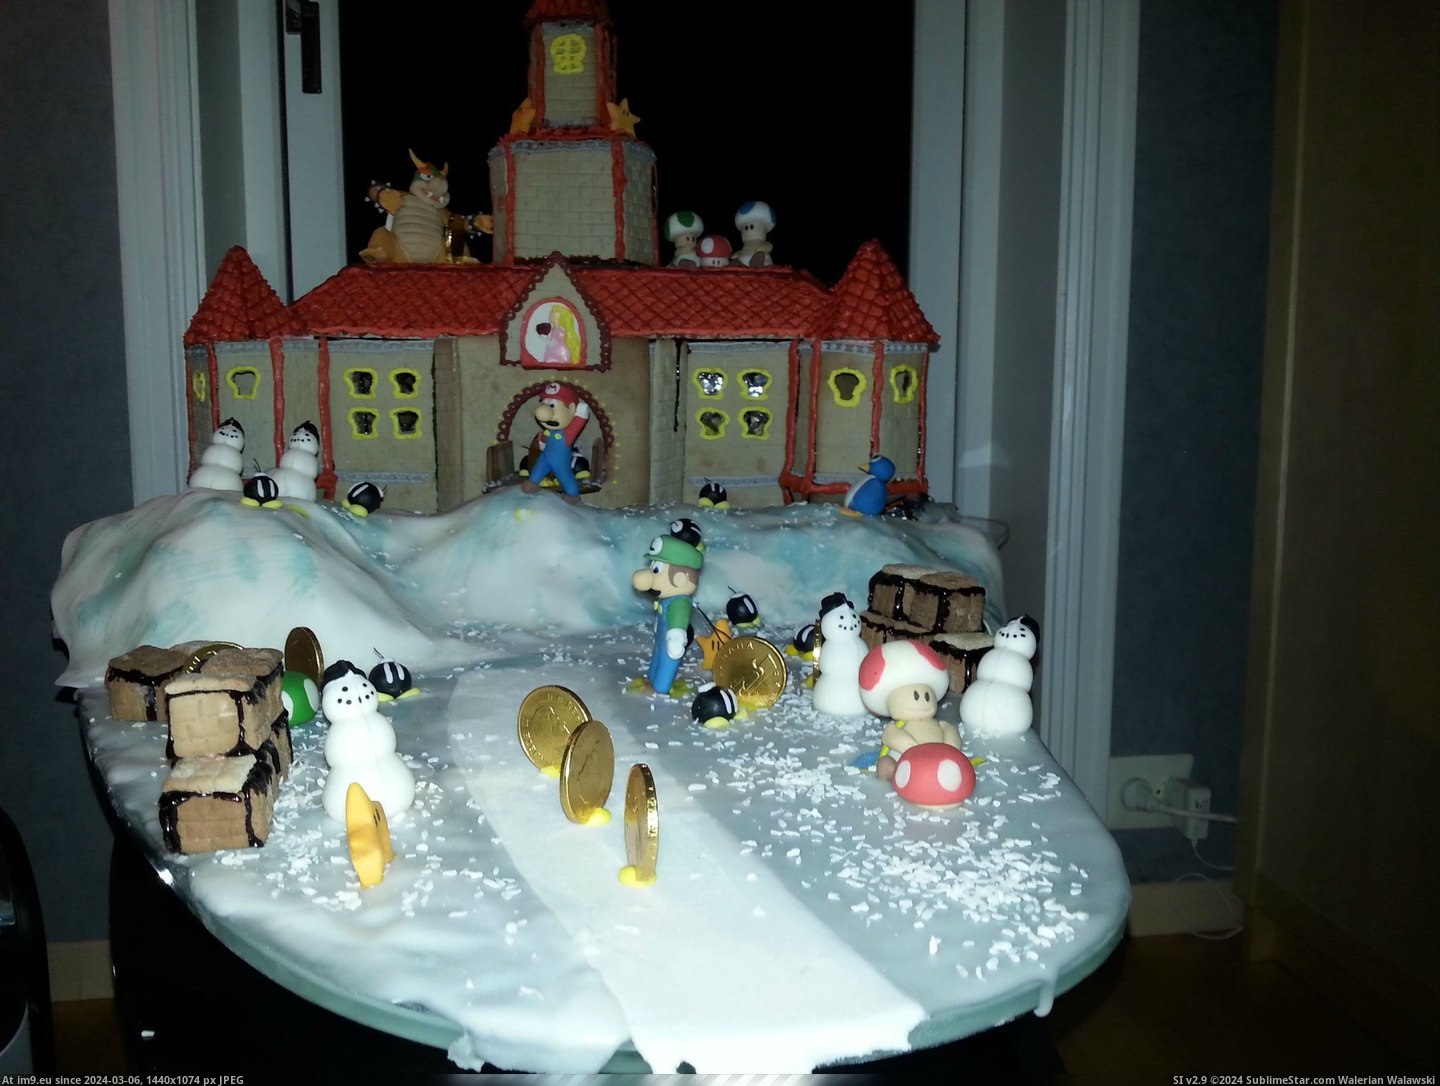 #Gaming #Out #Sister #Mushroom #Fondant #Castle #Father #Gingerbread [Gaming] My sister and father made Mushroom castle out of Gingerbread and Fondant Pic. (Изображение из альбом My r/GAMING favs))